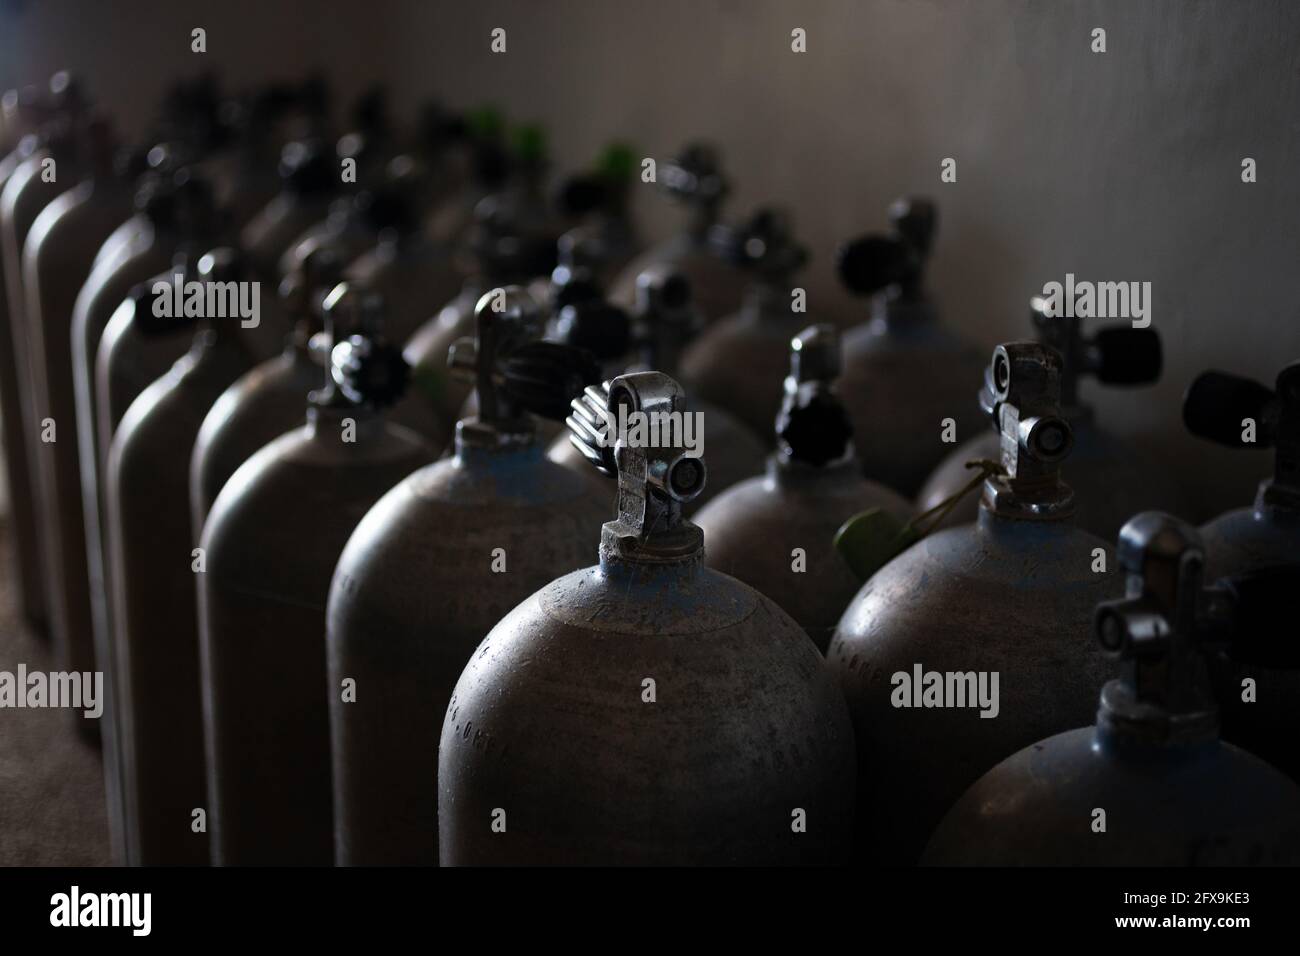 Metal tanks for scuba diving filled with compressed air Stock Photo